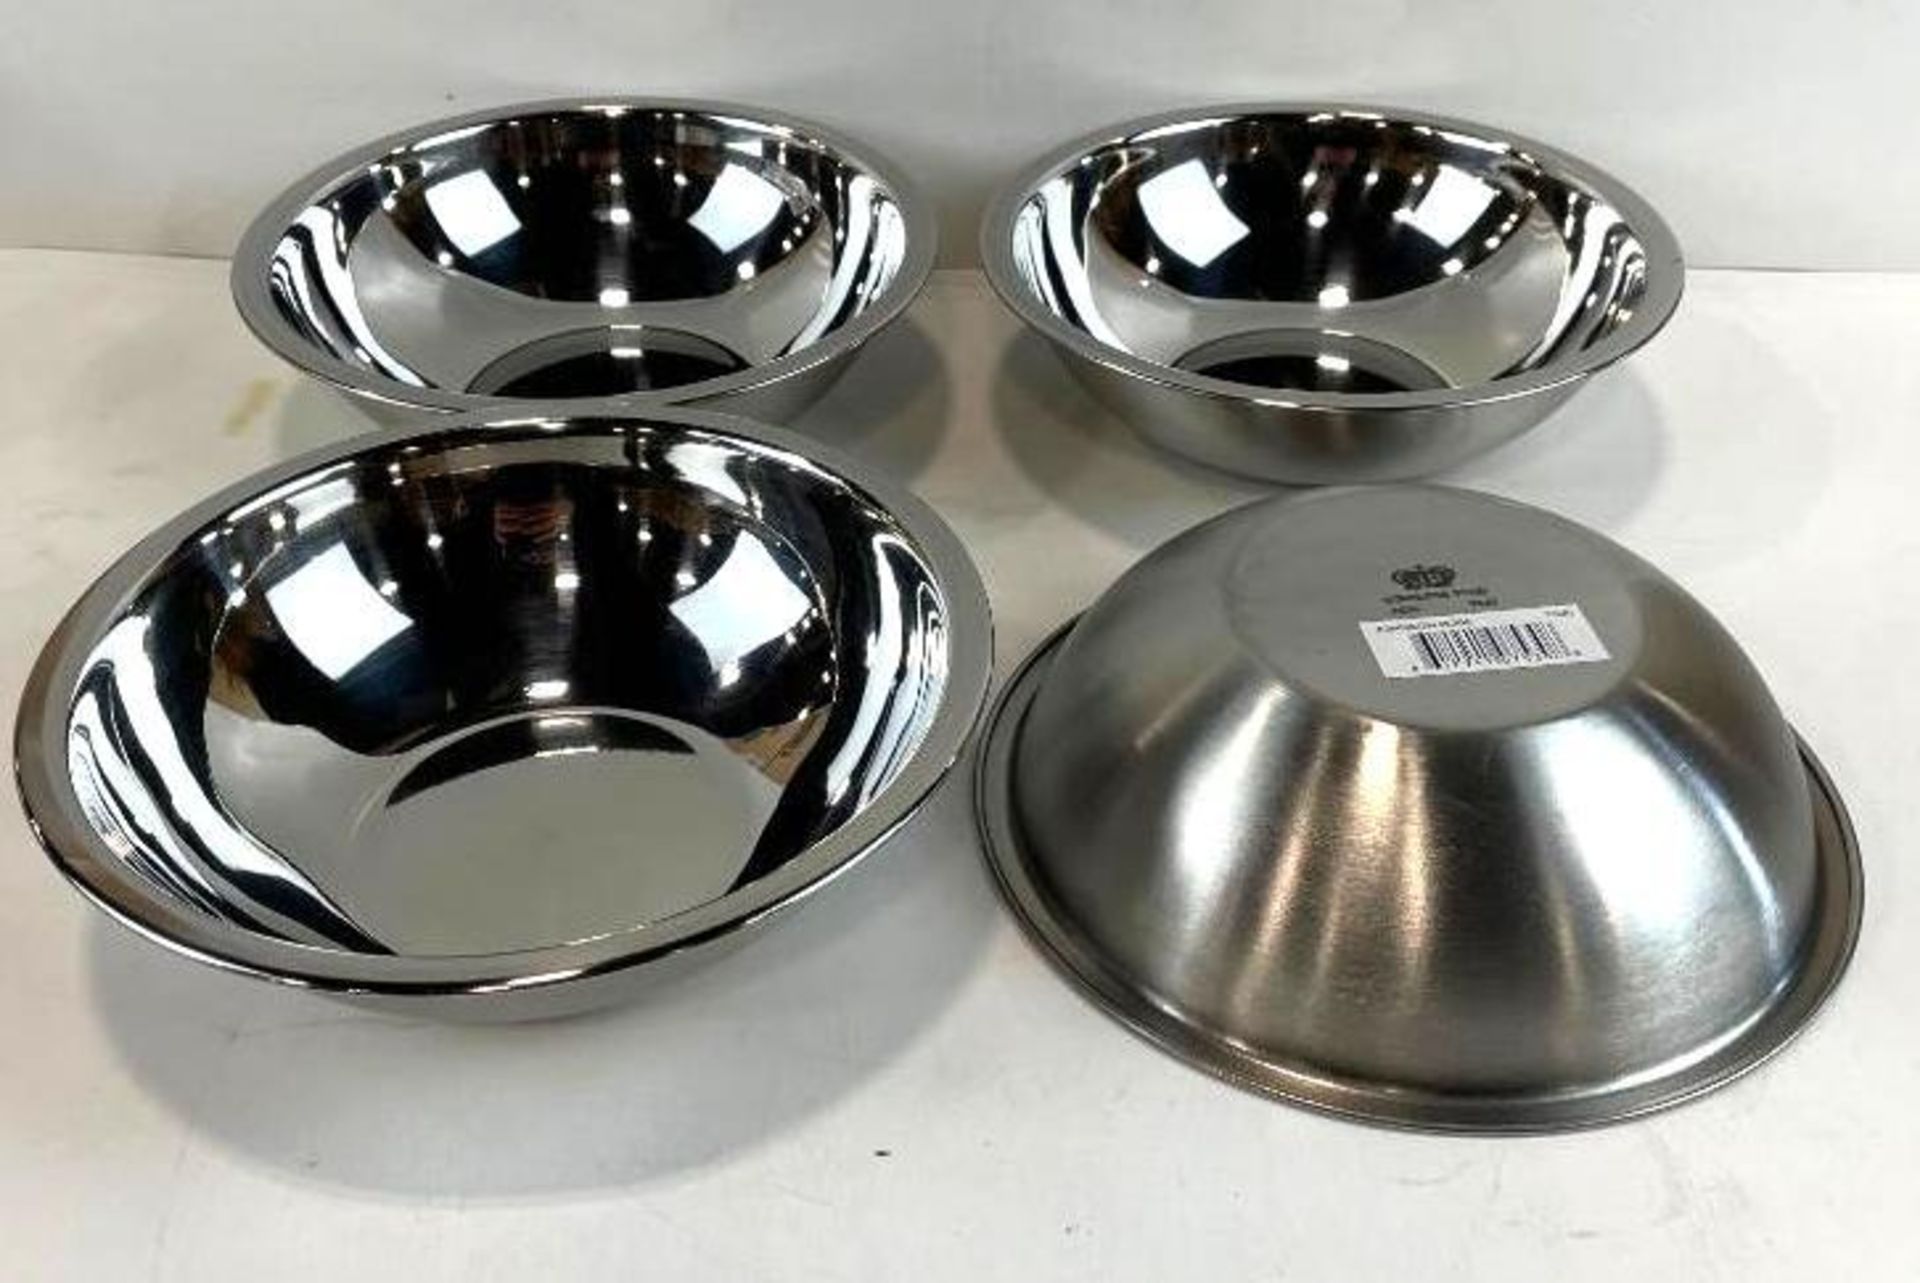 HEAVY DUTY STAINLESS STEEL MIXING BOWL 1 QT - LOT OF 4 - JOHNSON ROSE 7530